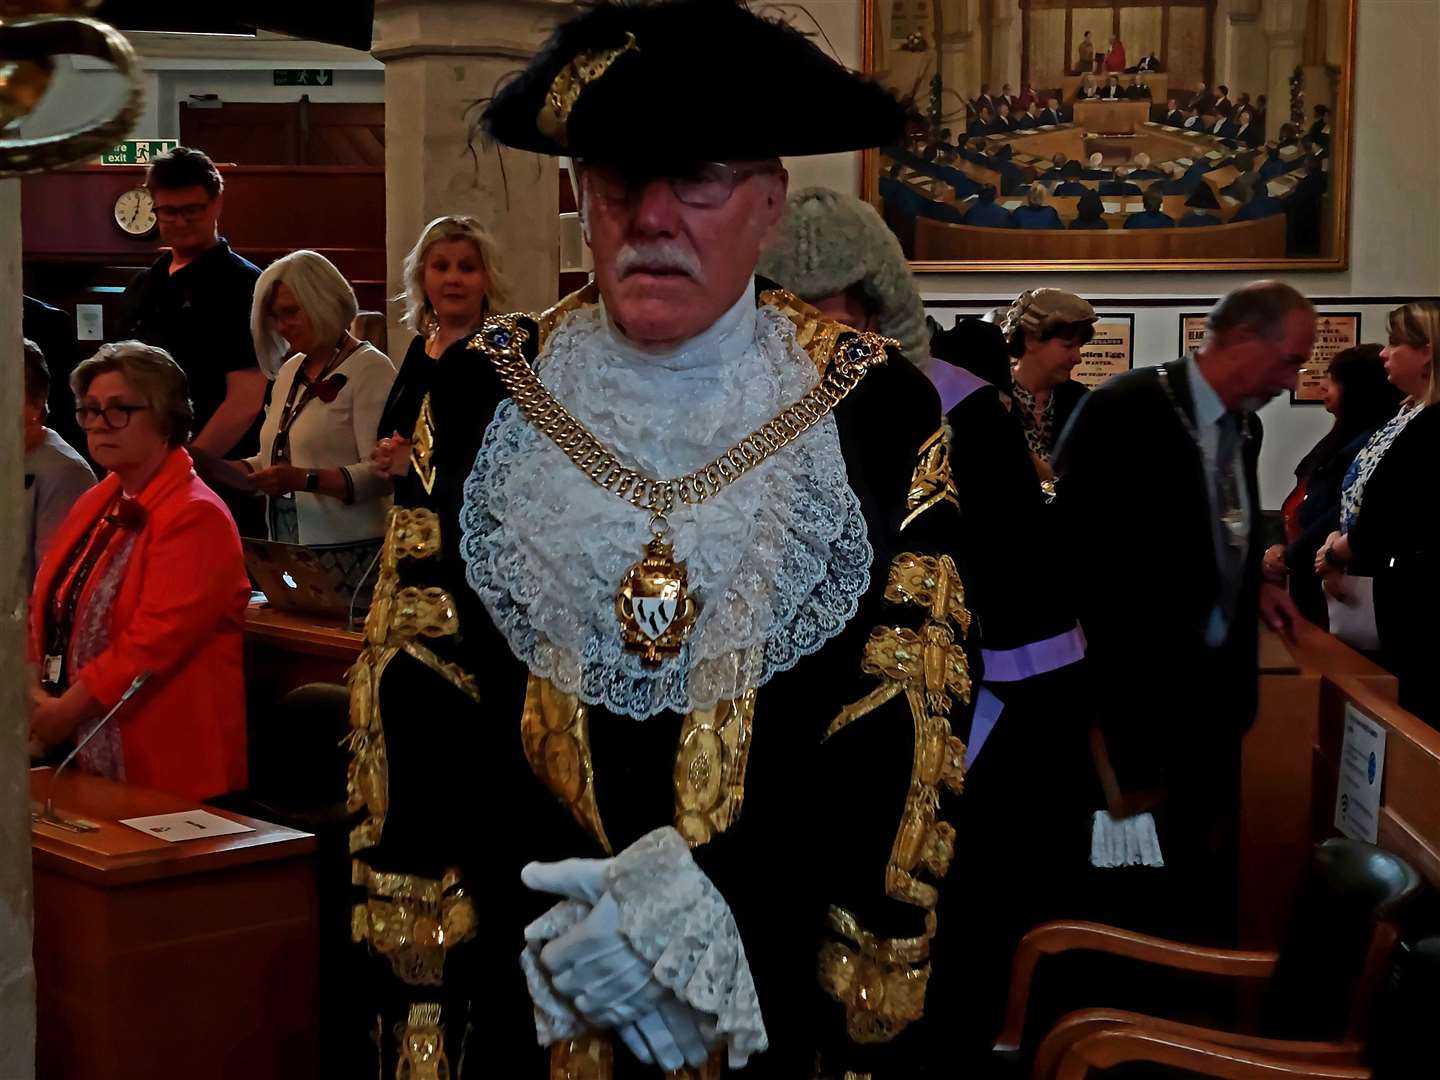 Former Lord Mayor Pat Todd entering the Guildhall for the start of the meeting